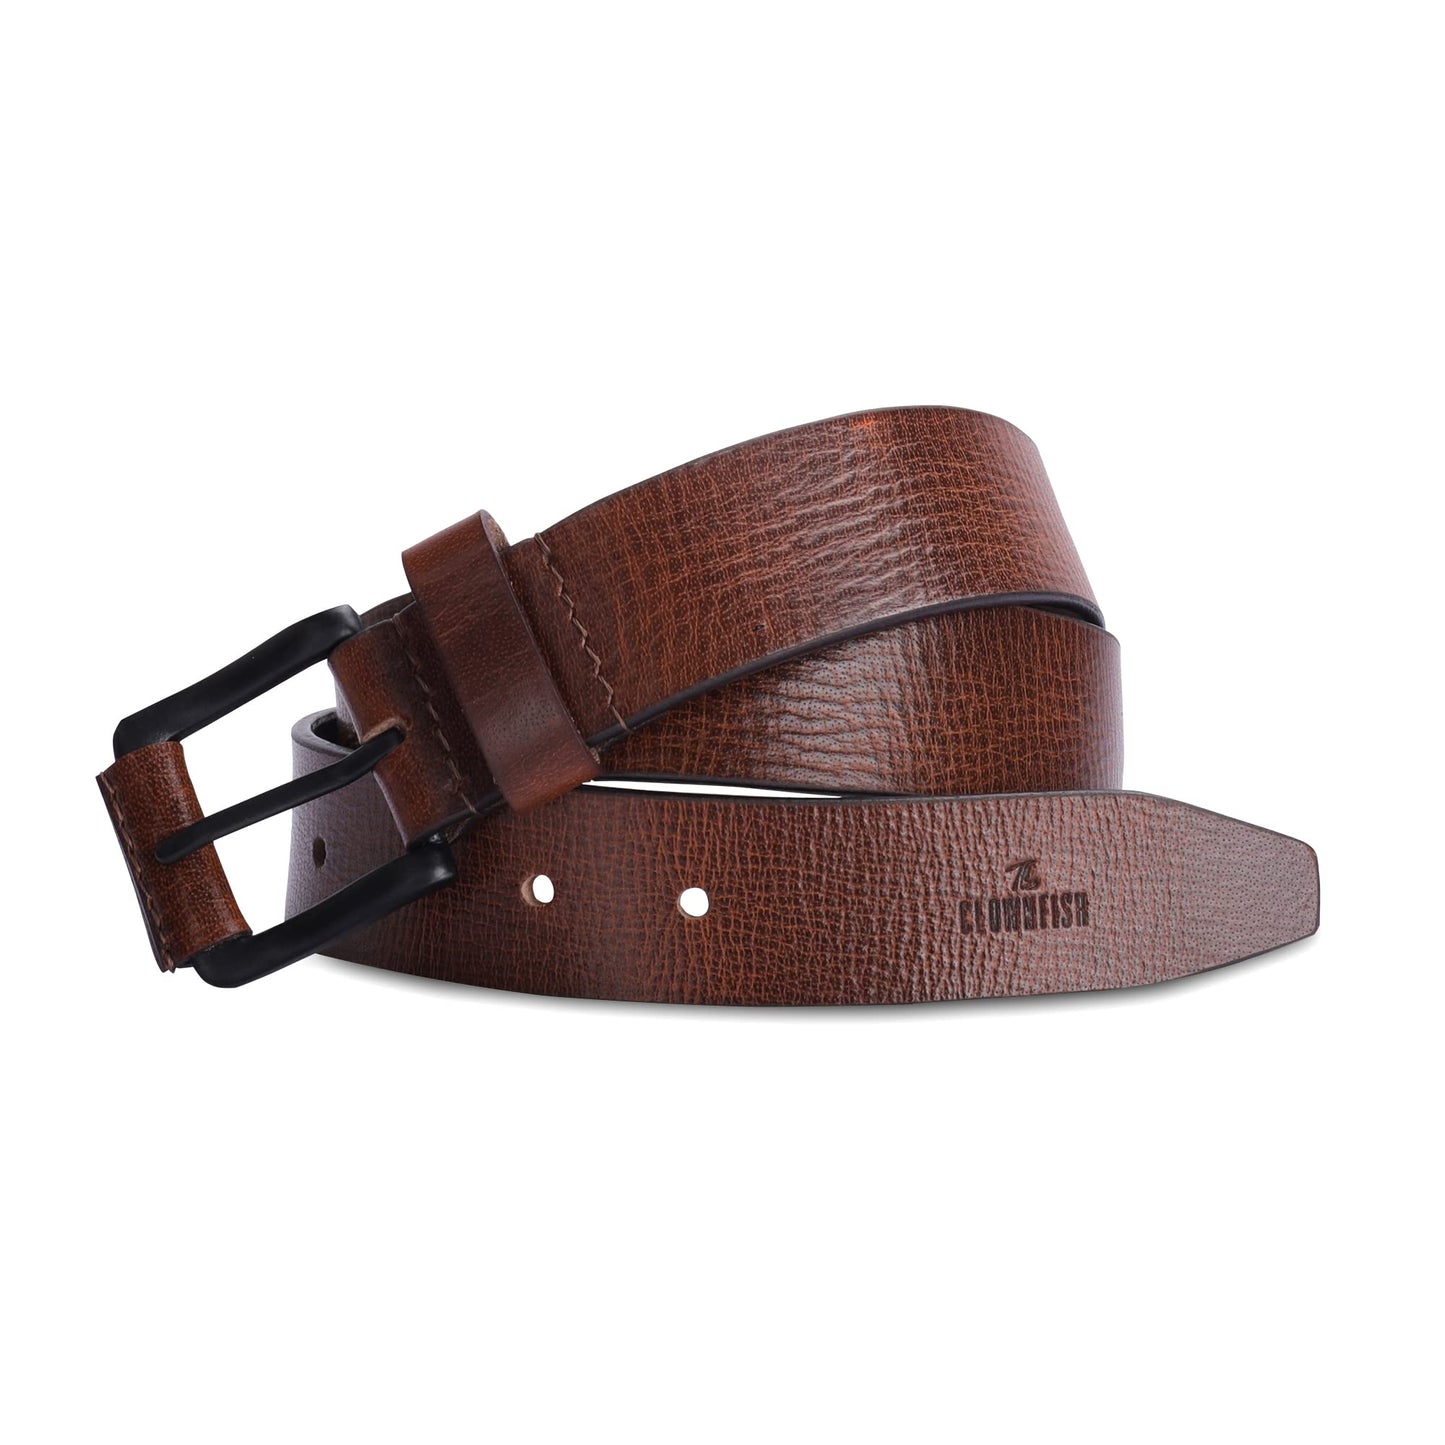 THE CLOWNFISH Men's Genuine Leather Belt - Tan (Size-36 inches)